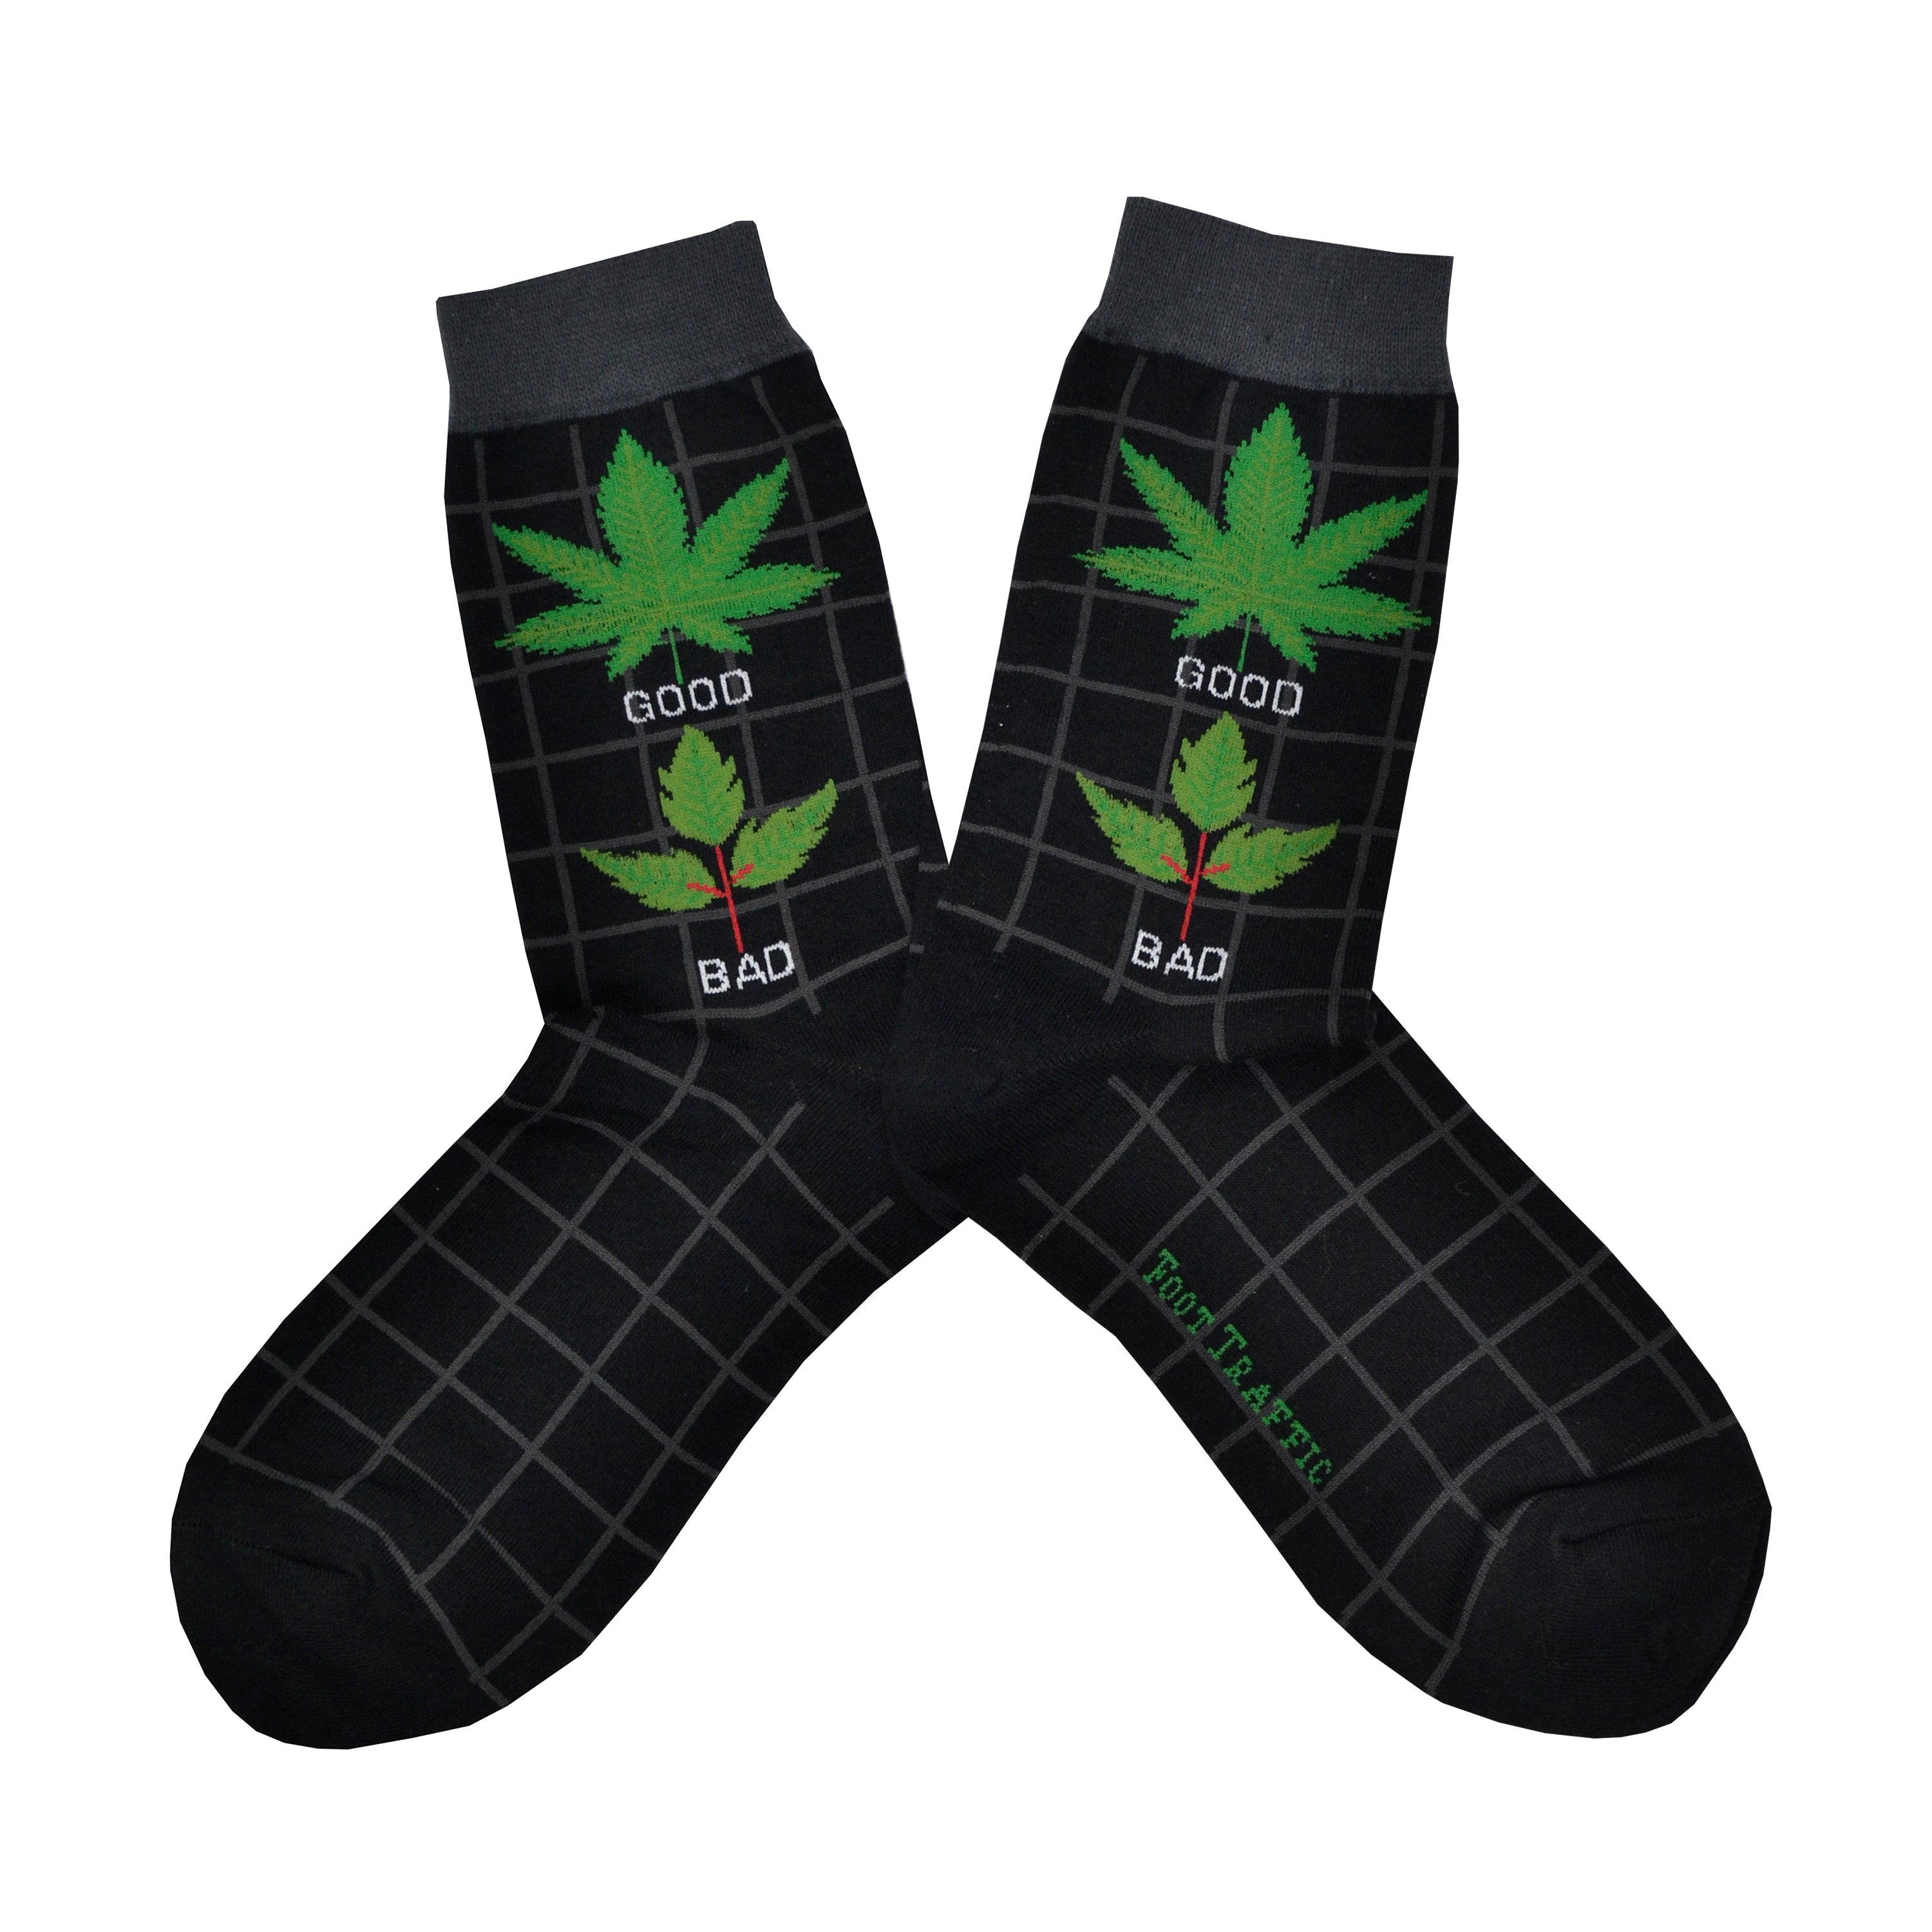 Shown in a flatlay, a pair of women's Foot Traffic cotton crew socks in black with a grey cuff and a grey grid pattern. The leg of the sock has a marijuana leaf with the word 